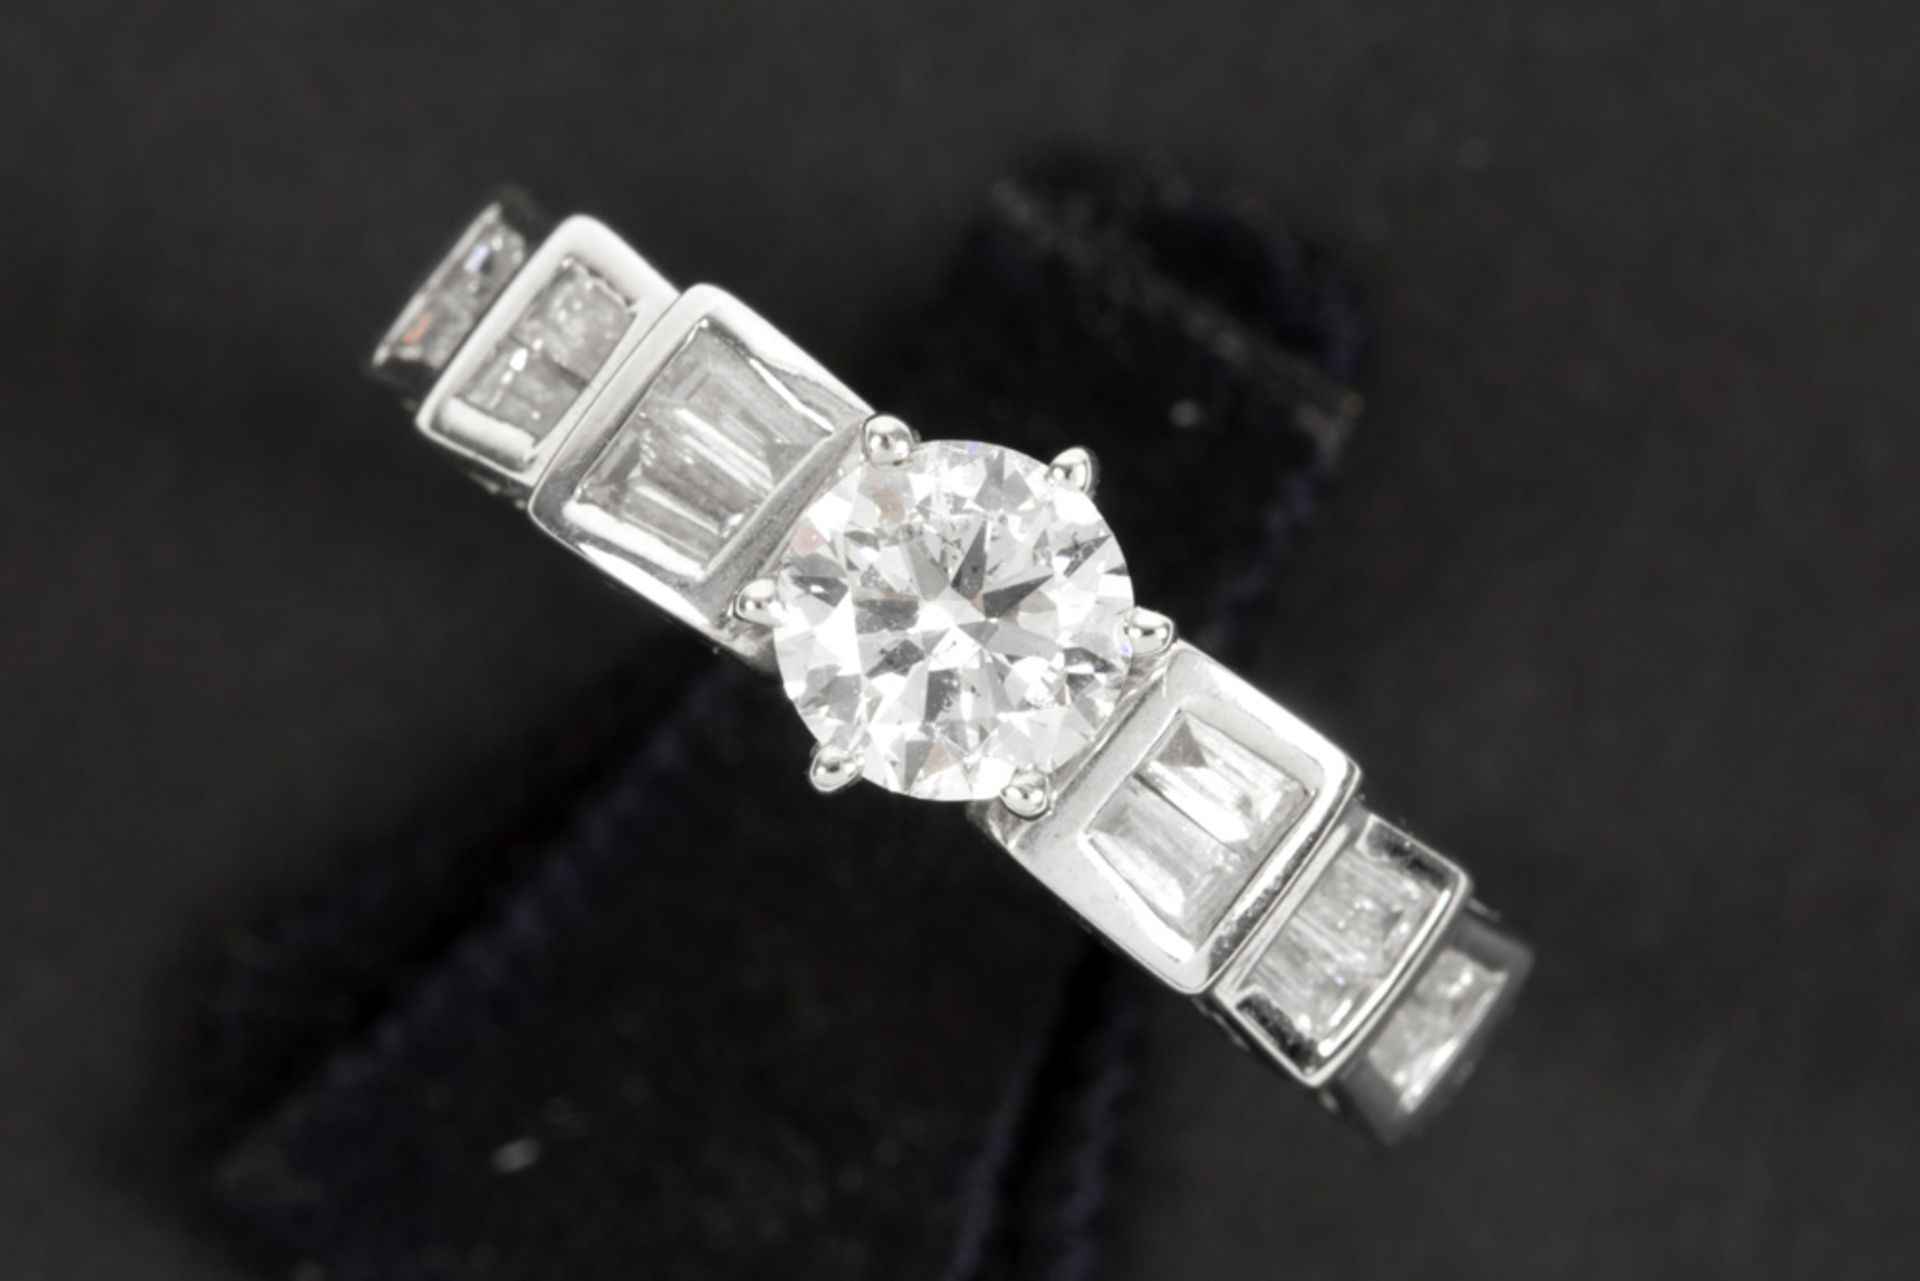 a 0,72 carat brilliant cut diamond set in a ring in white gold (18 carat) with more then 0,40